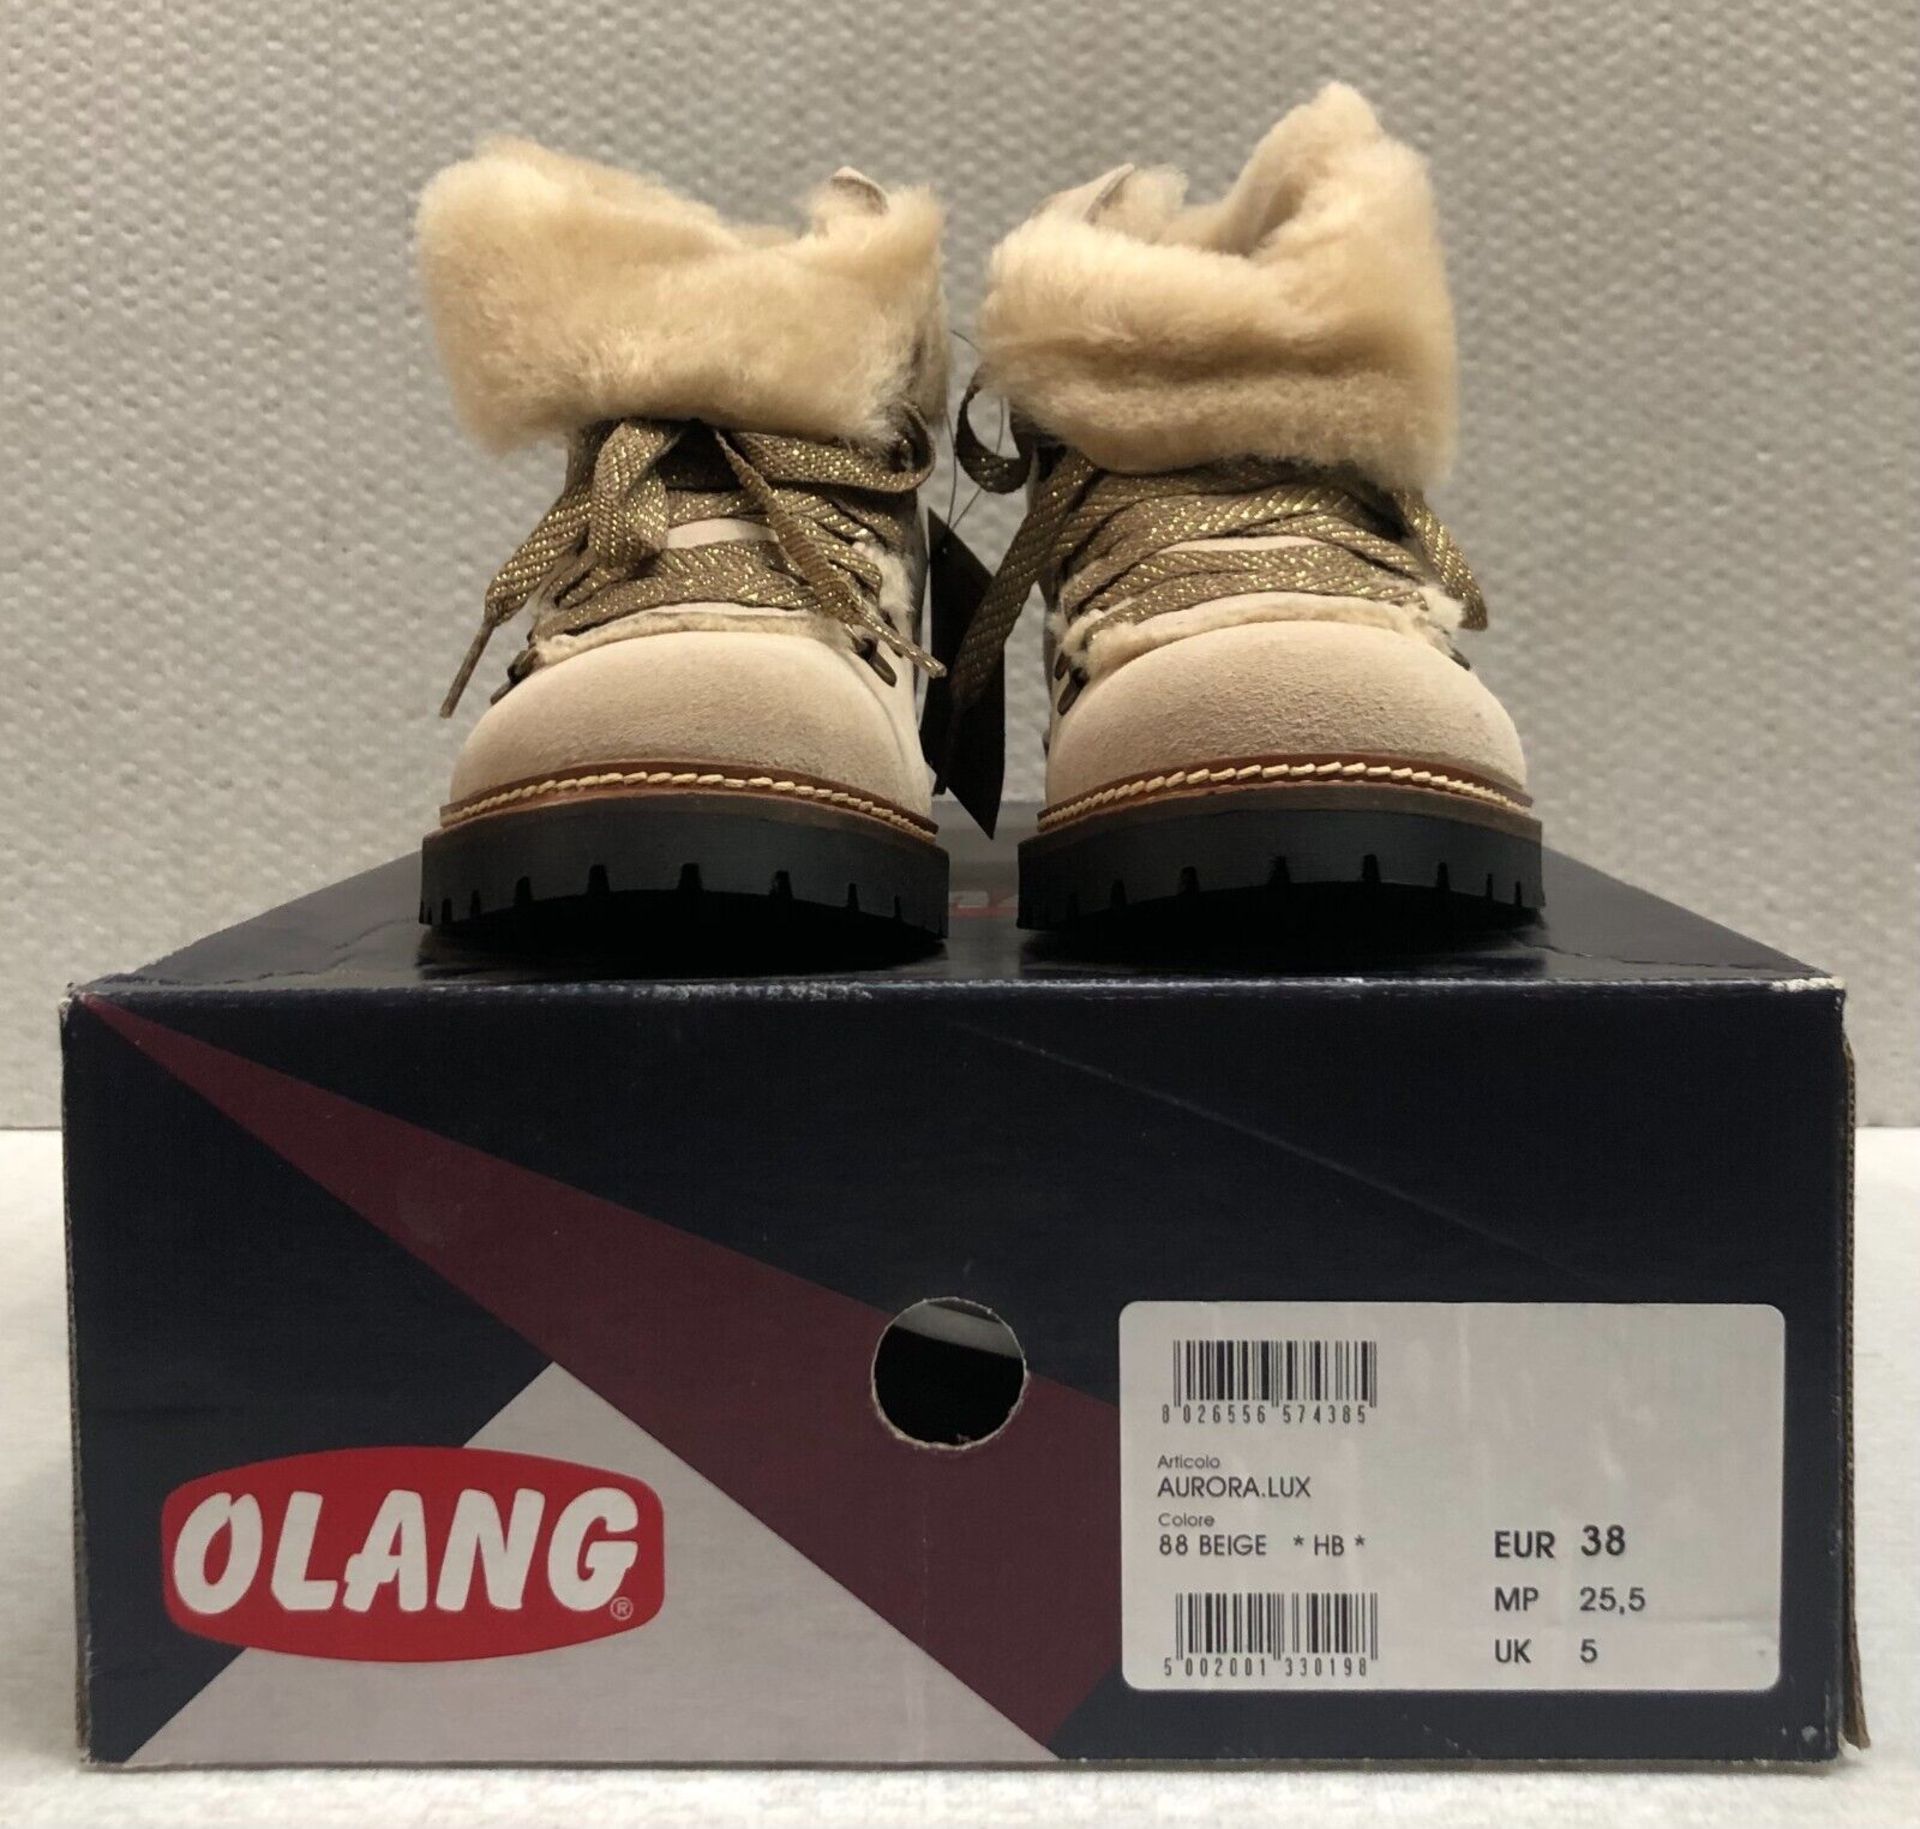 1 x Pair of Designer Olang Women's Winter Boots - Aurora.Lux 88 Beige - Euro Size 38 - New Boxed - Image 4 of 7